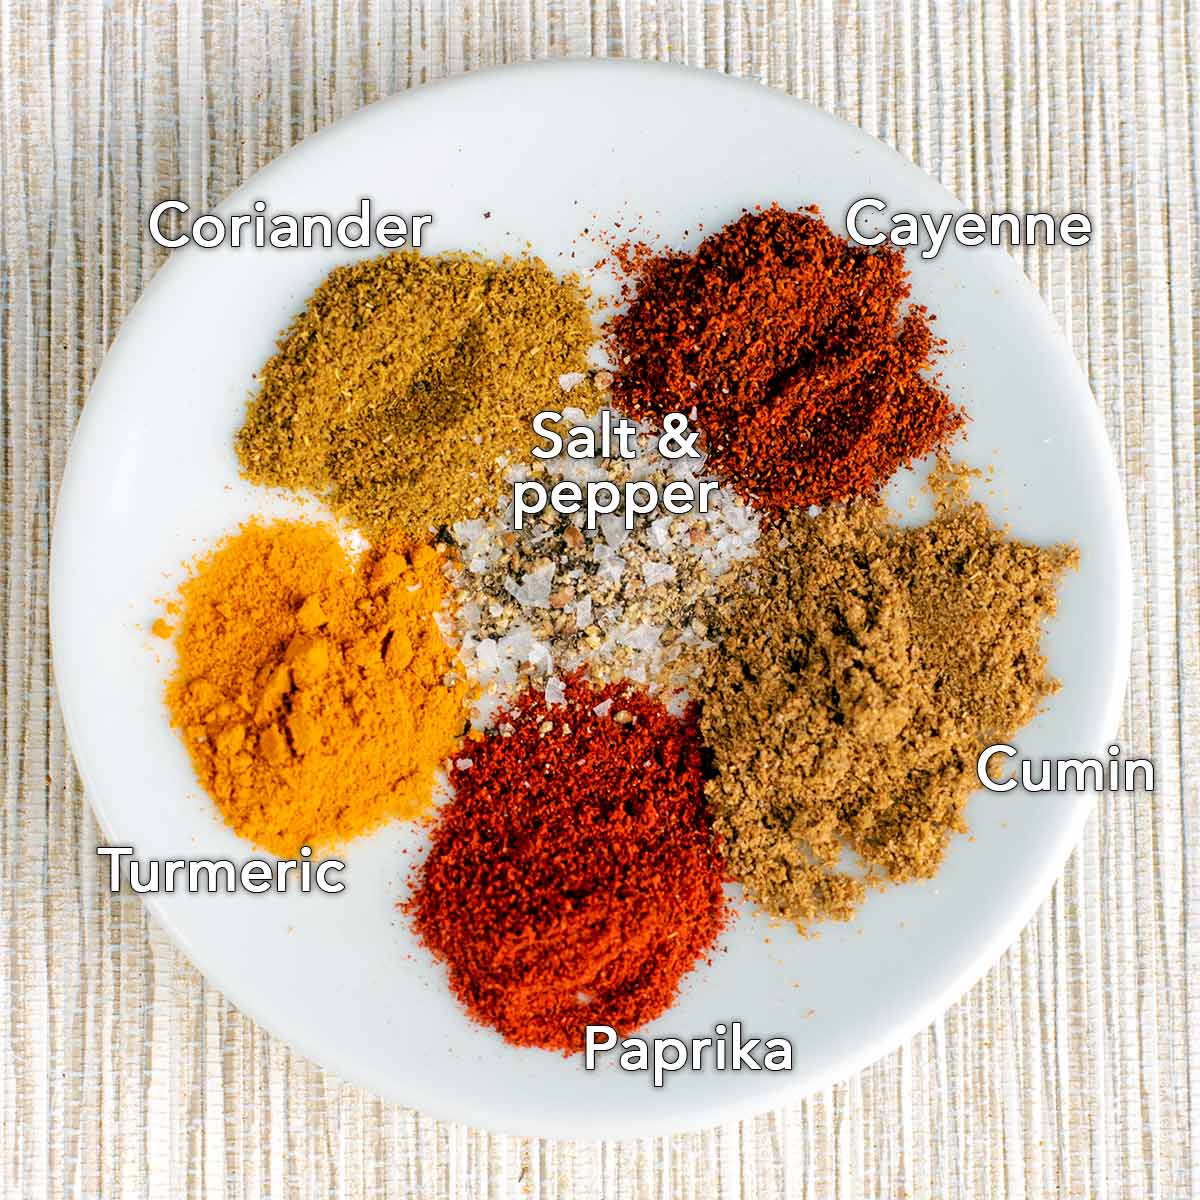 A plate of seven spices and seasonings with text overlay labels.